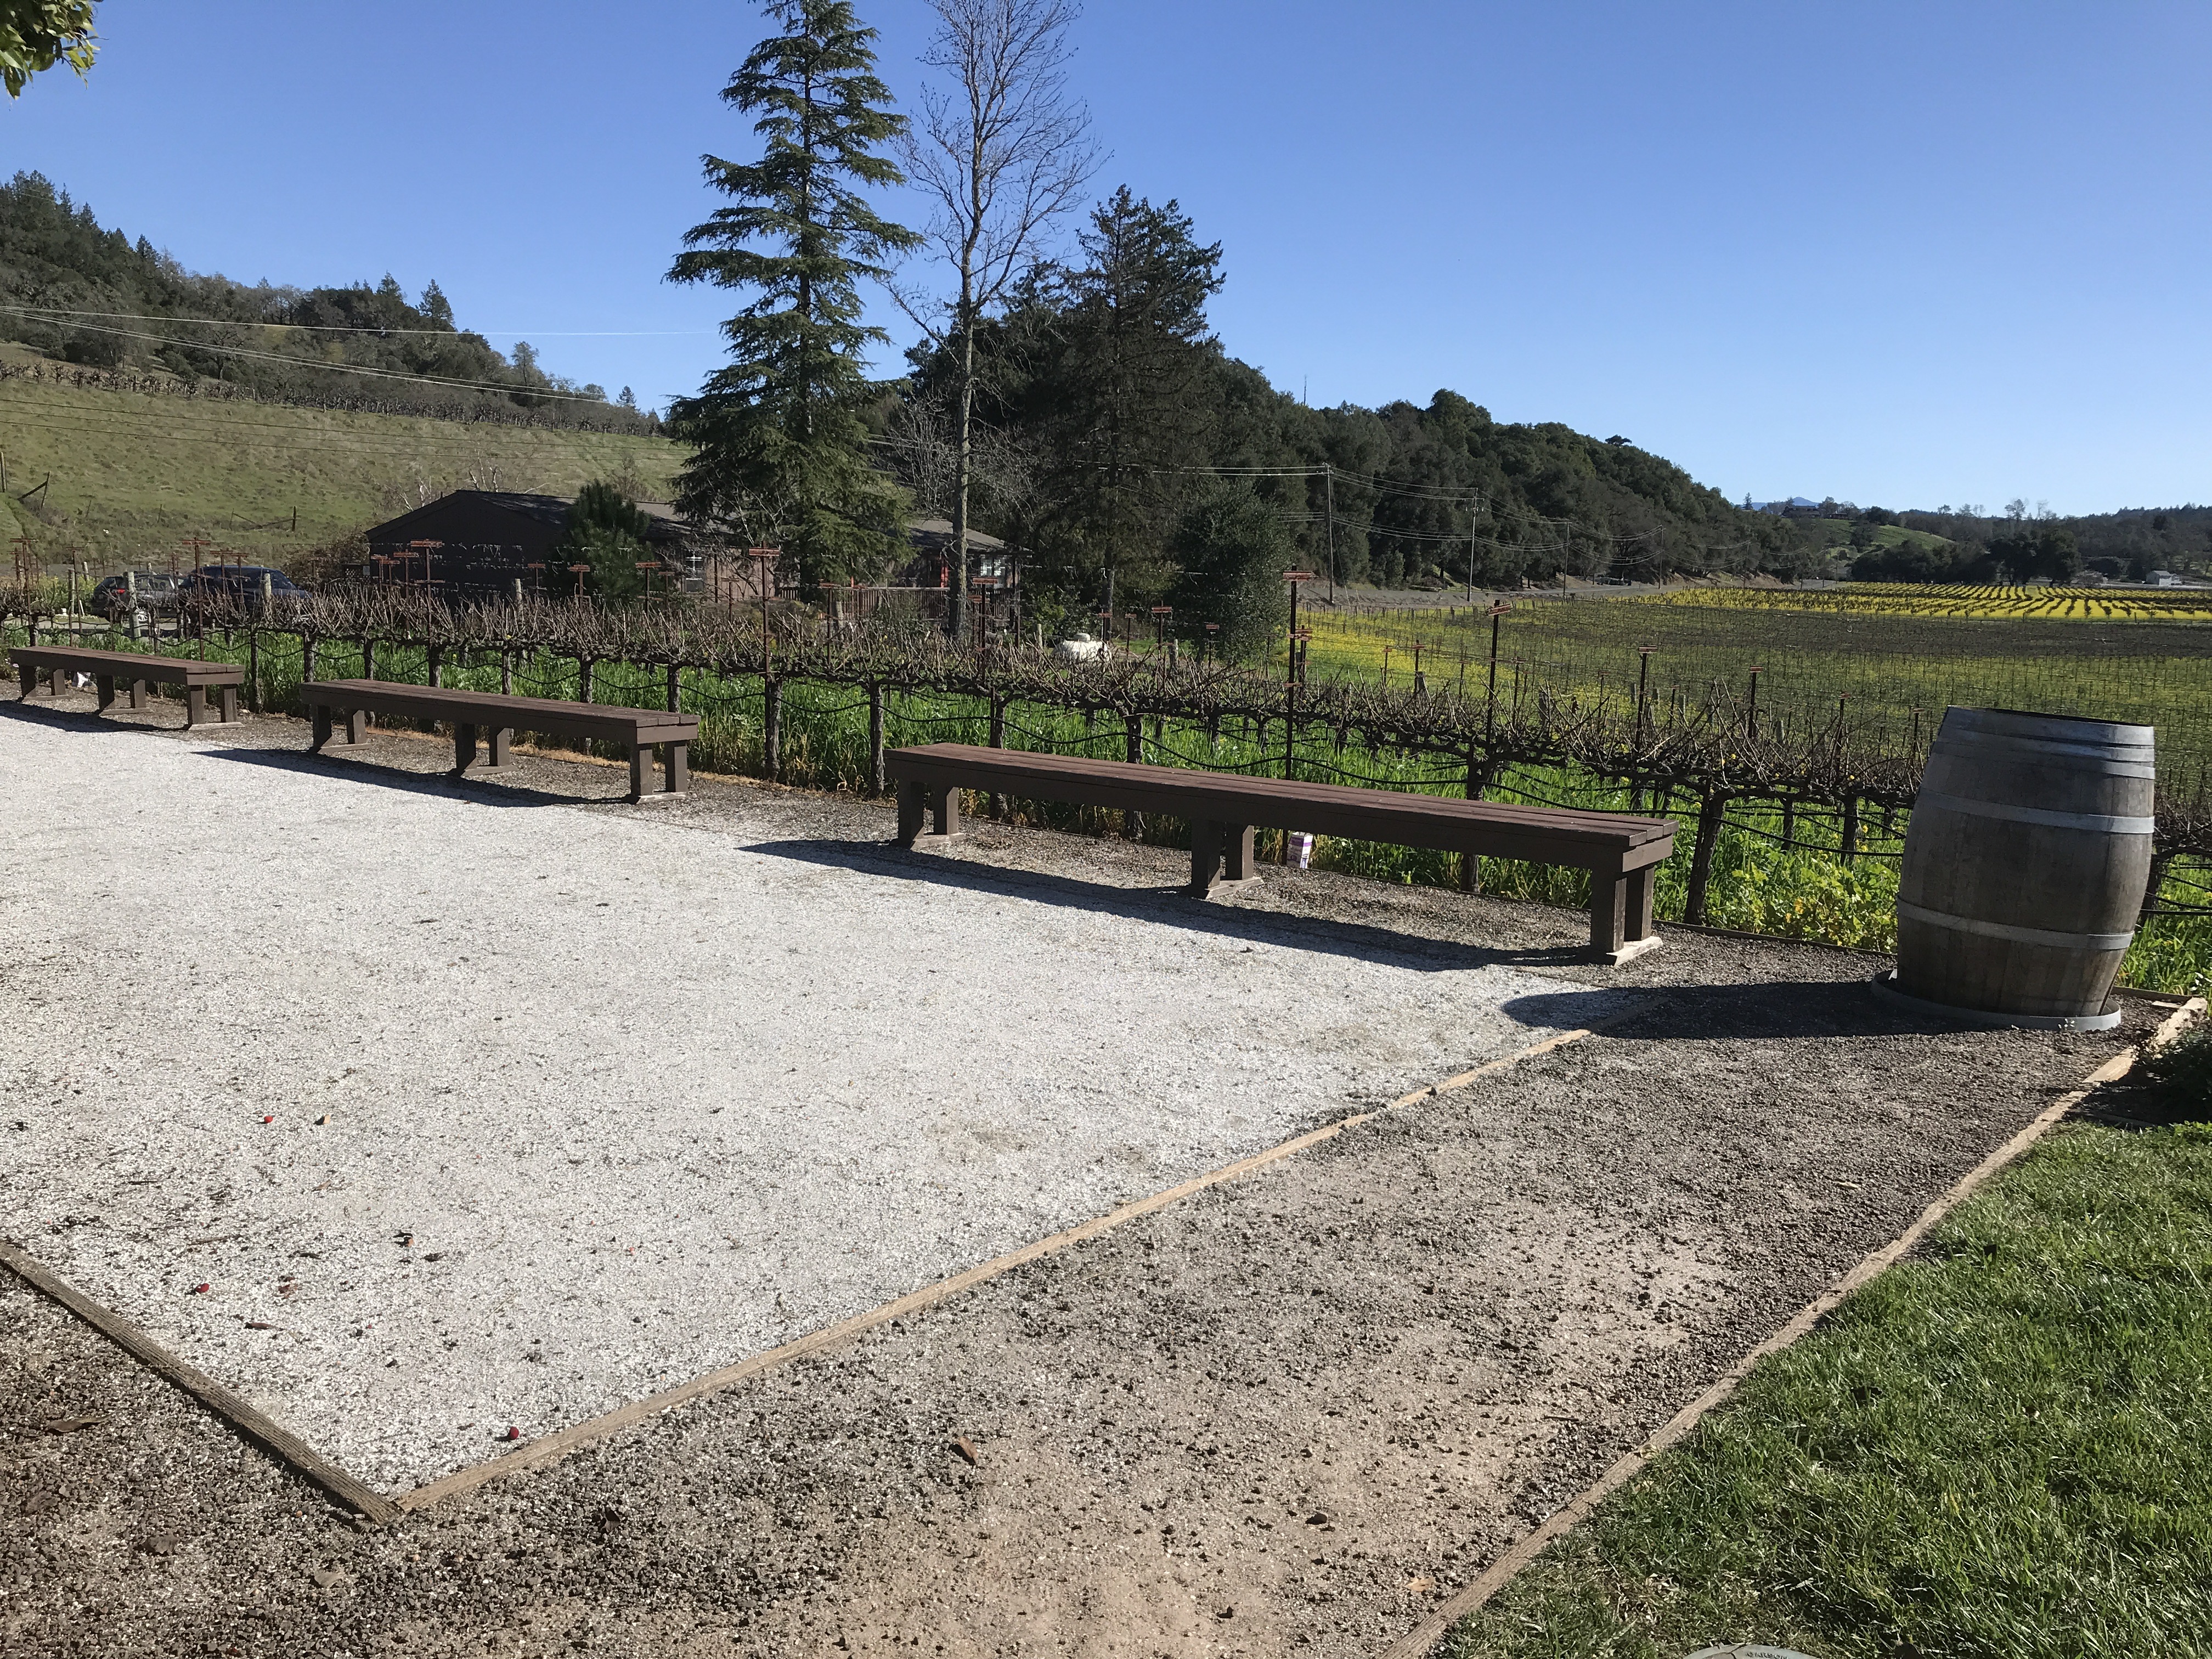 Ultimate List of Kid-Friendly Wineries in Sonoma | San Francisco with Kids | Family Friendly Wineries | Henry and Andrew’s Guide (www.henryandandrewsguide.com)